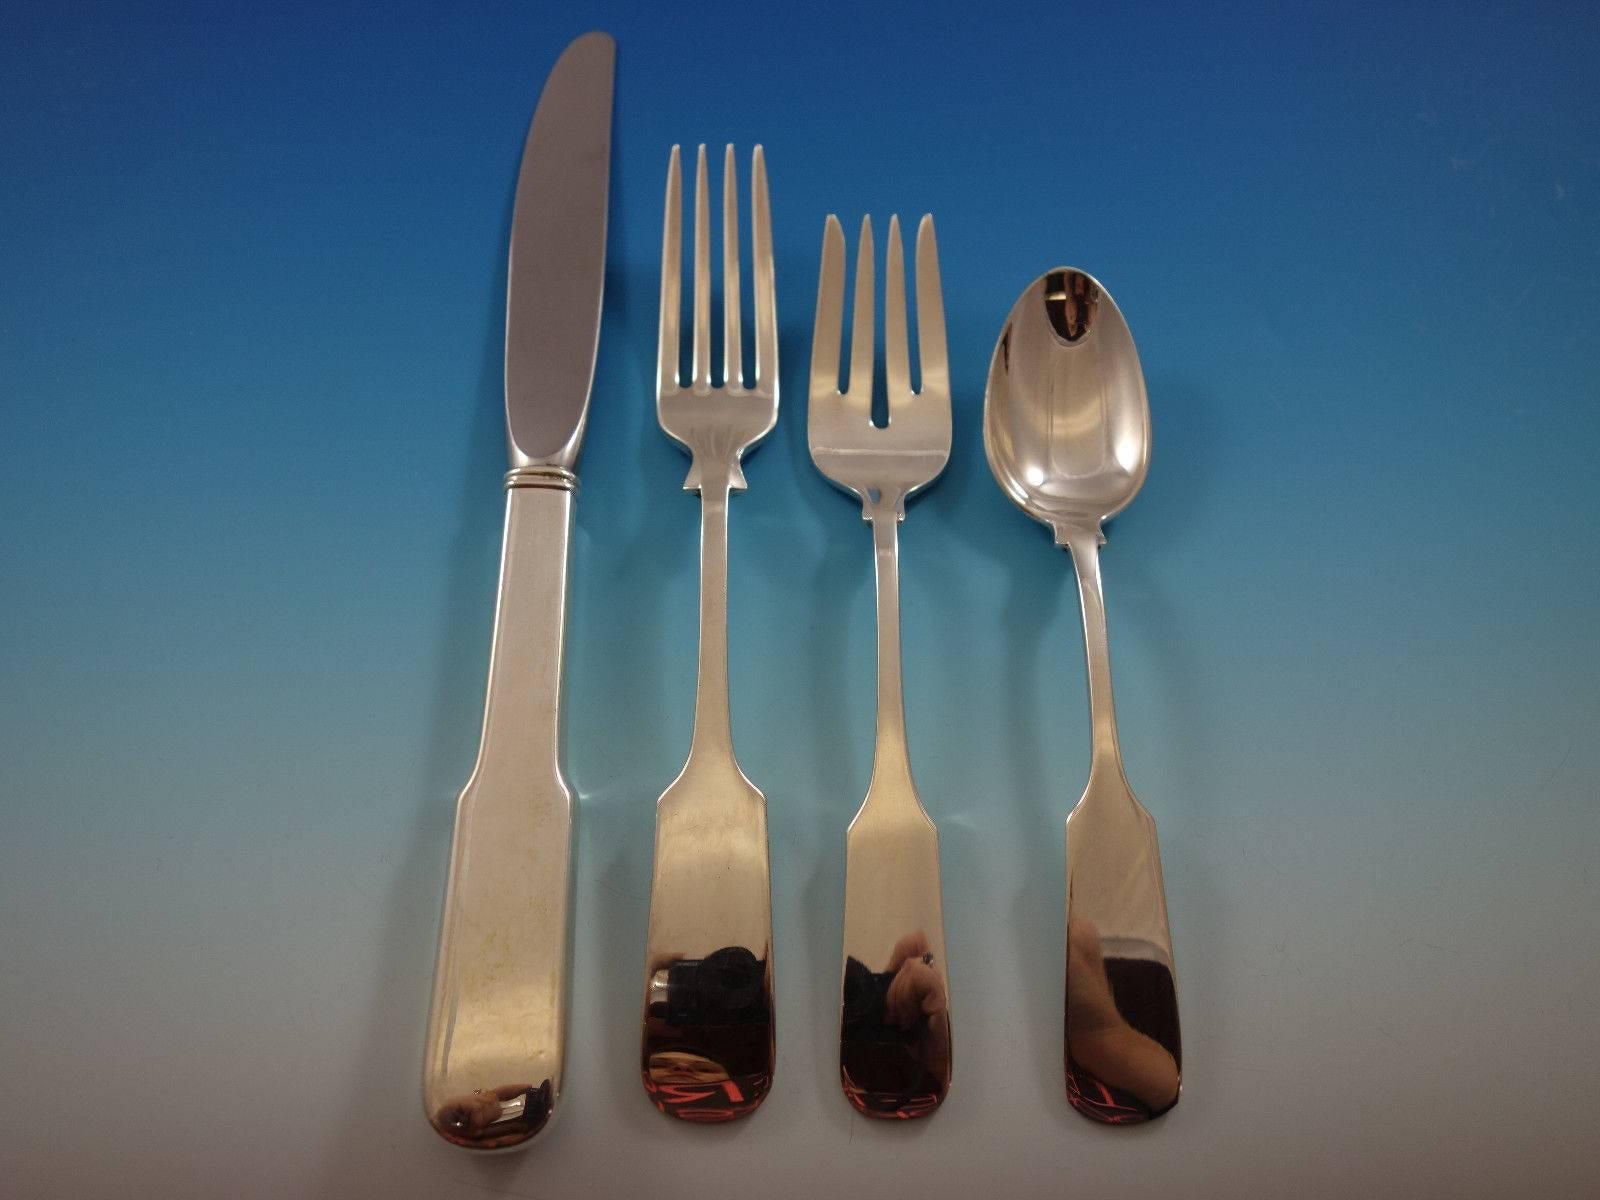 Old English Tipt by Gorham sterling silver flatware set with classic fiddle shape and unadorned handle - 58 pieces. This set includes: 

eight knives, 8 3/4